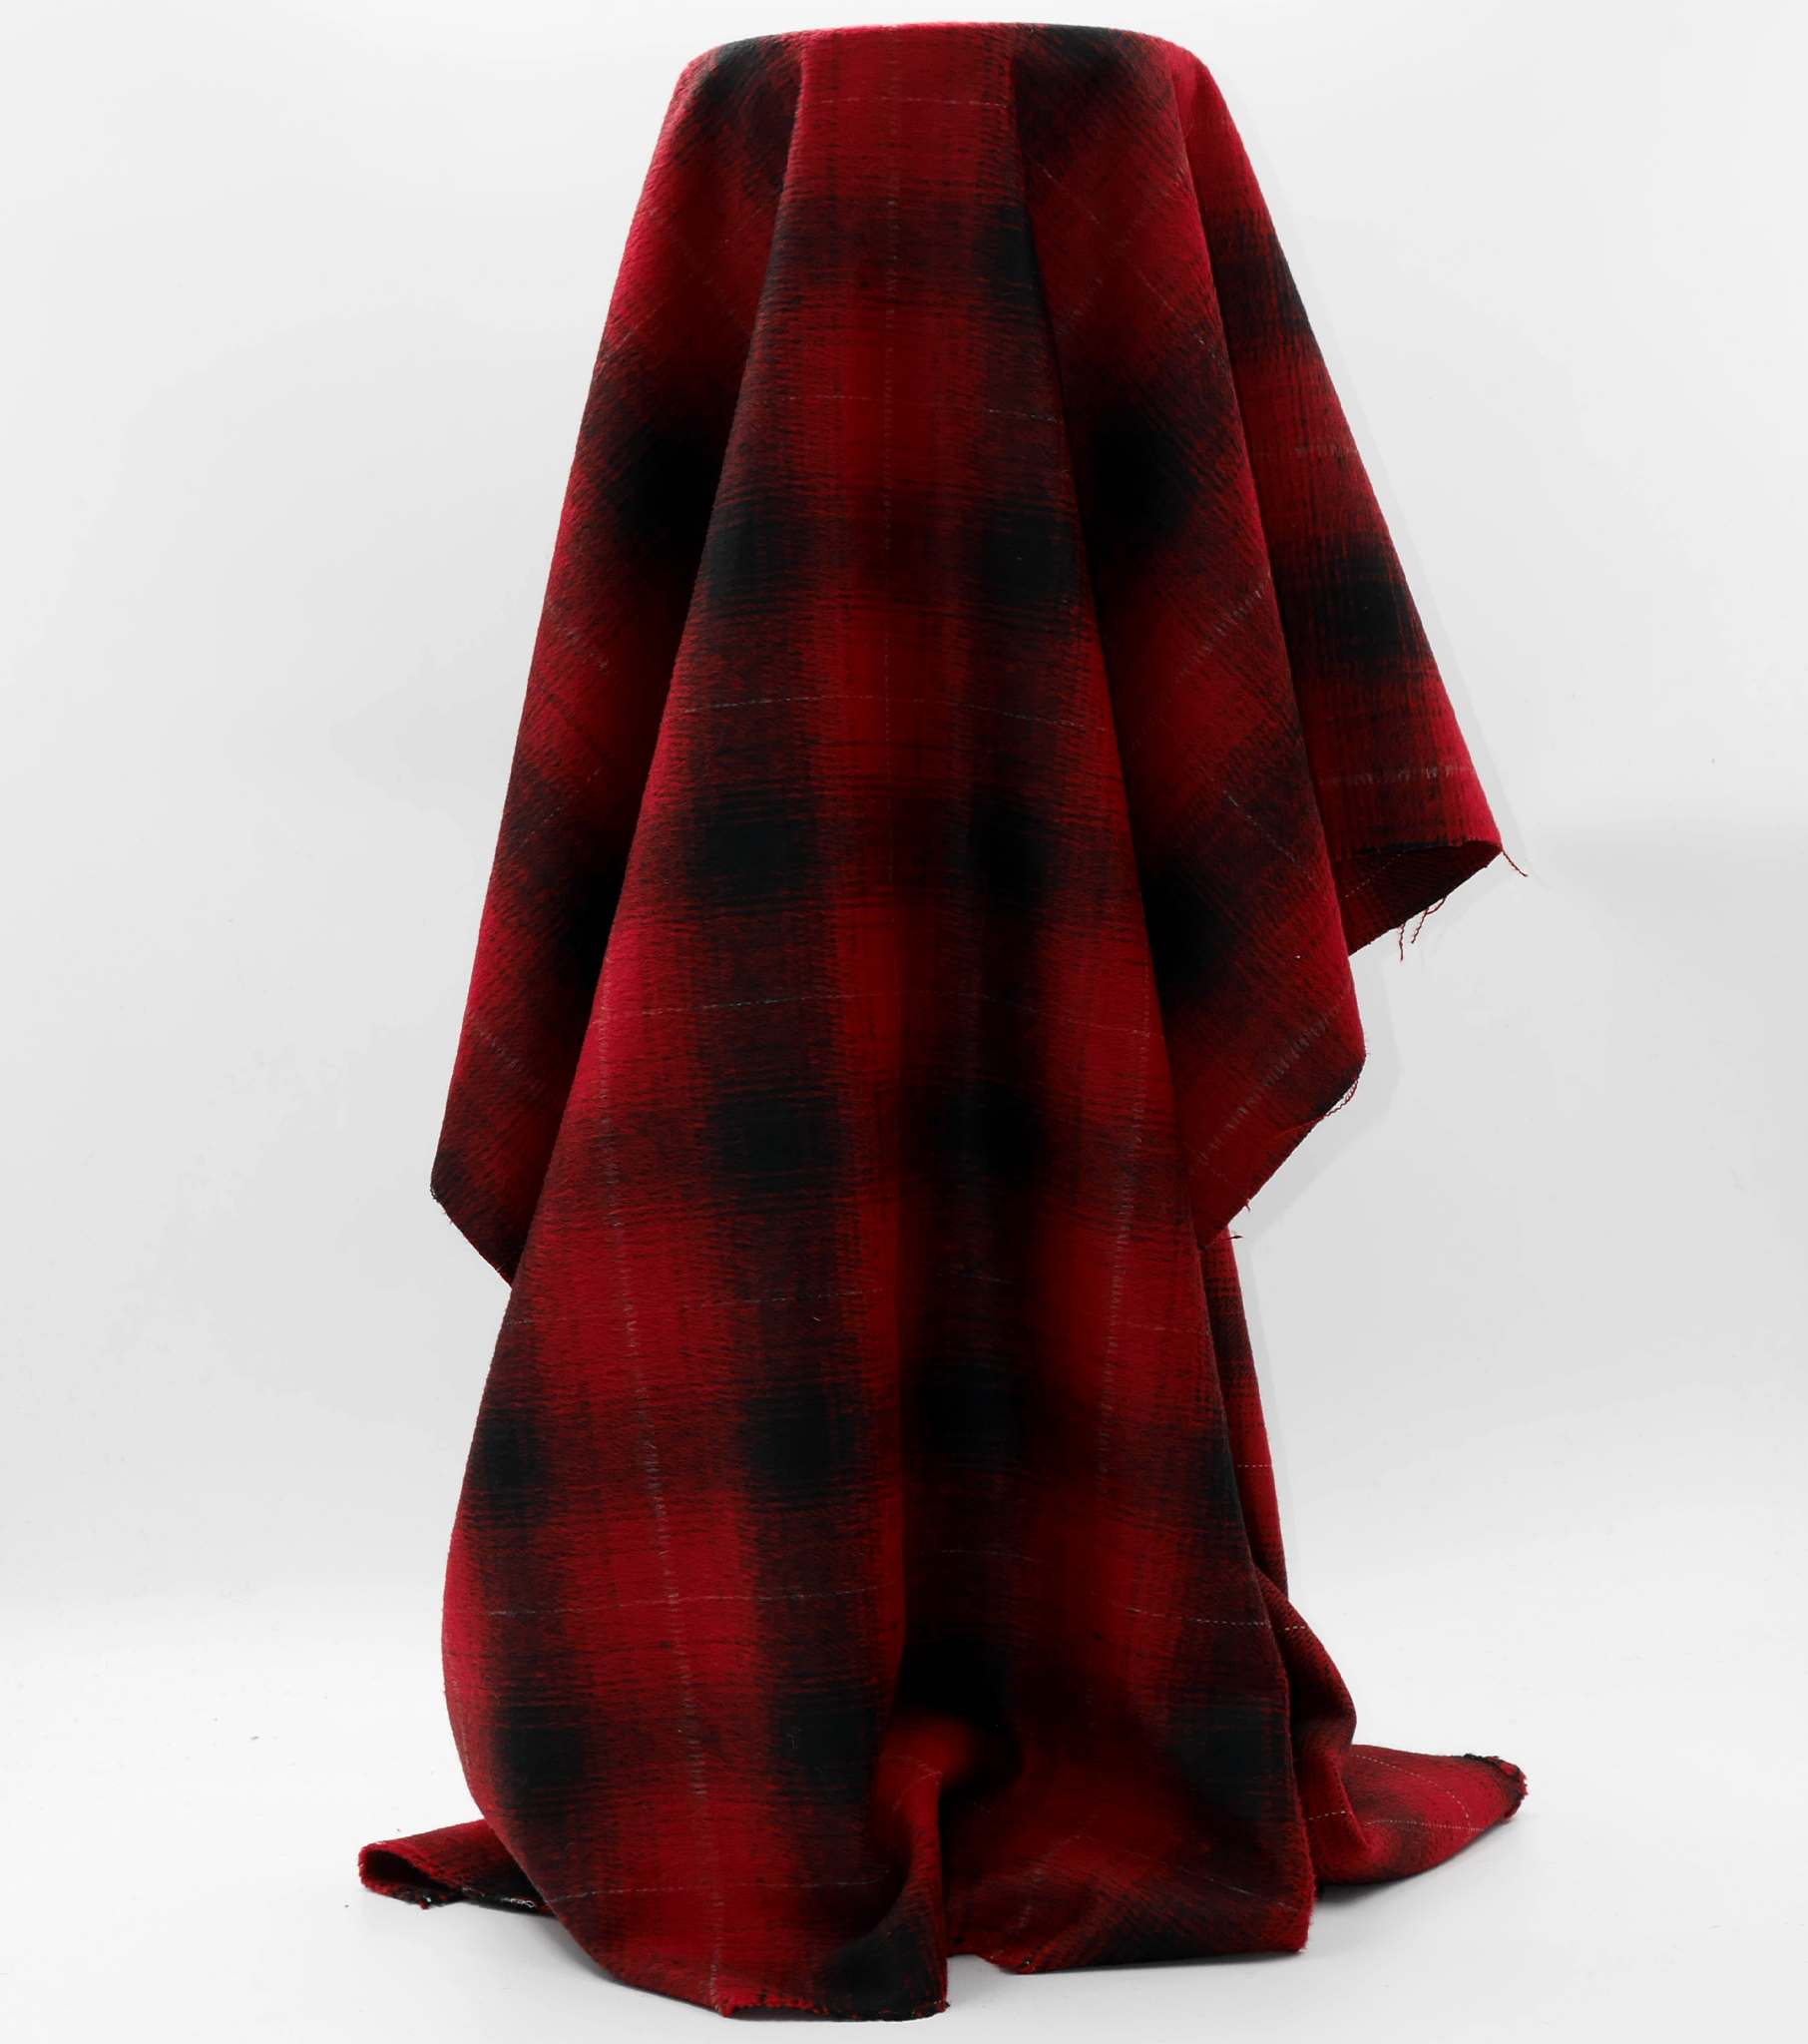 Checked Wool $18.00p/m - Red & Black (WC2)